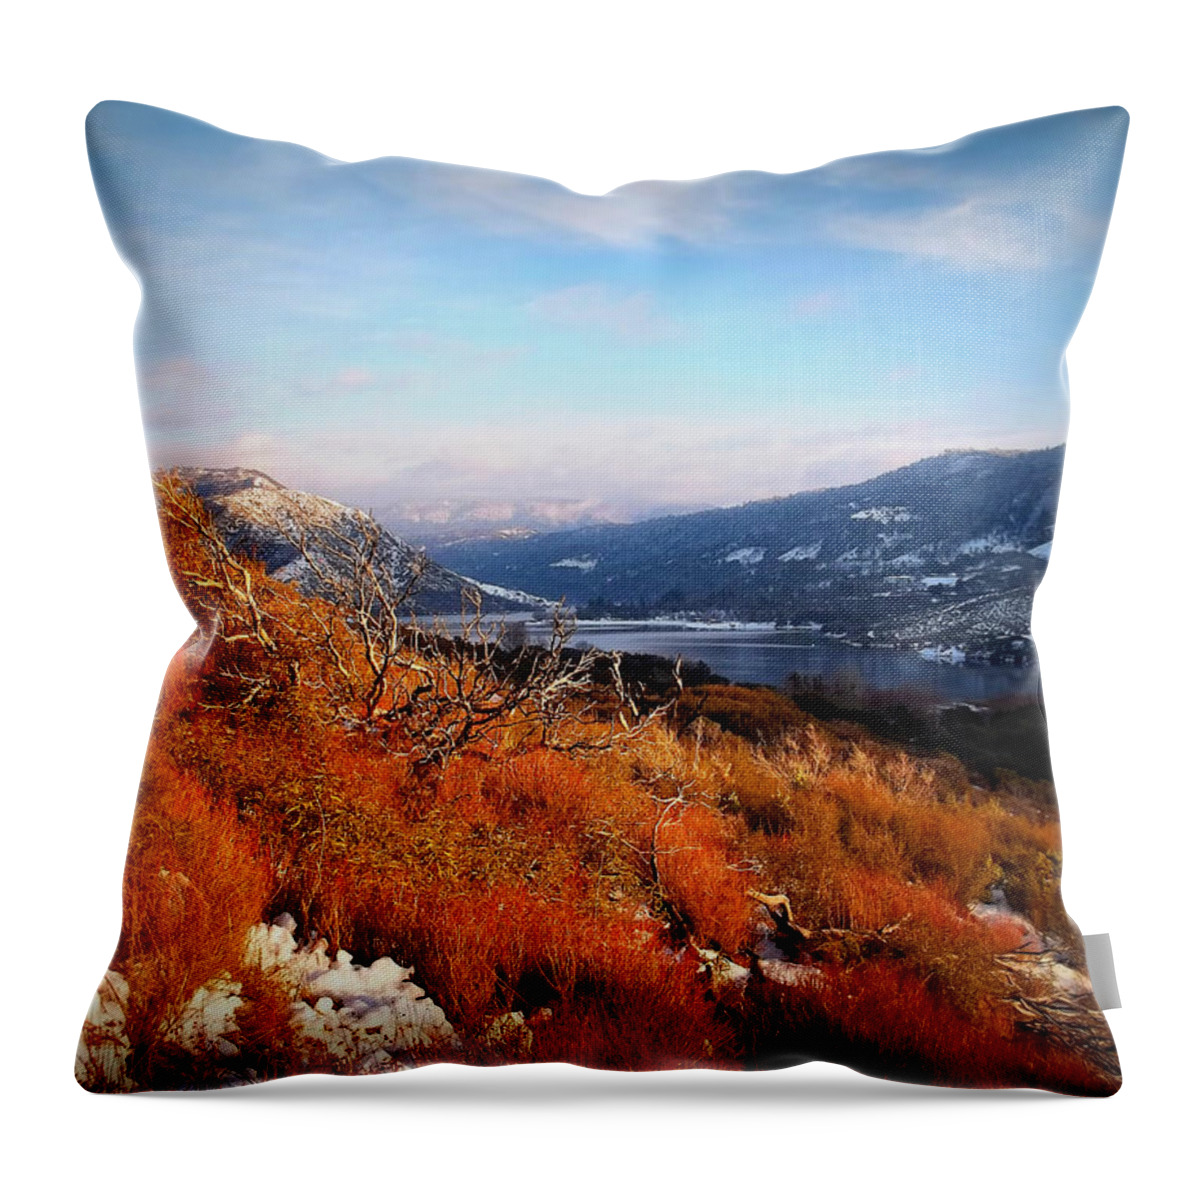 Silverwood Lake Throw Pillow featuring the photograph Silverwood Lake - California by Glenn McCarthy Art and Photography